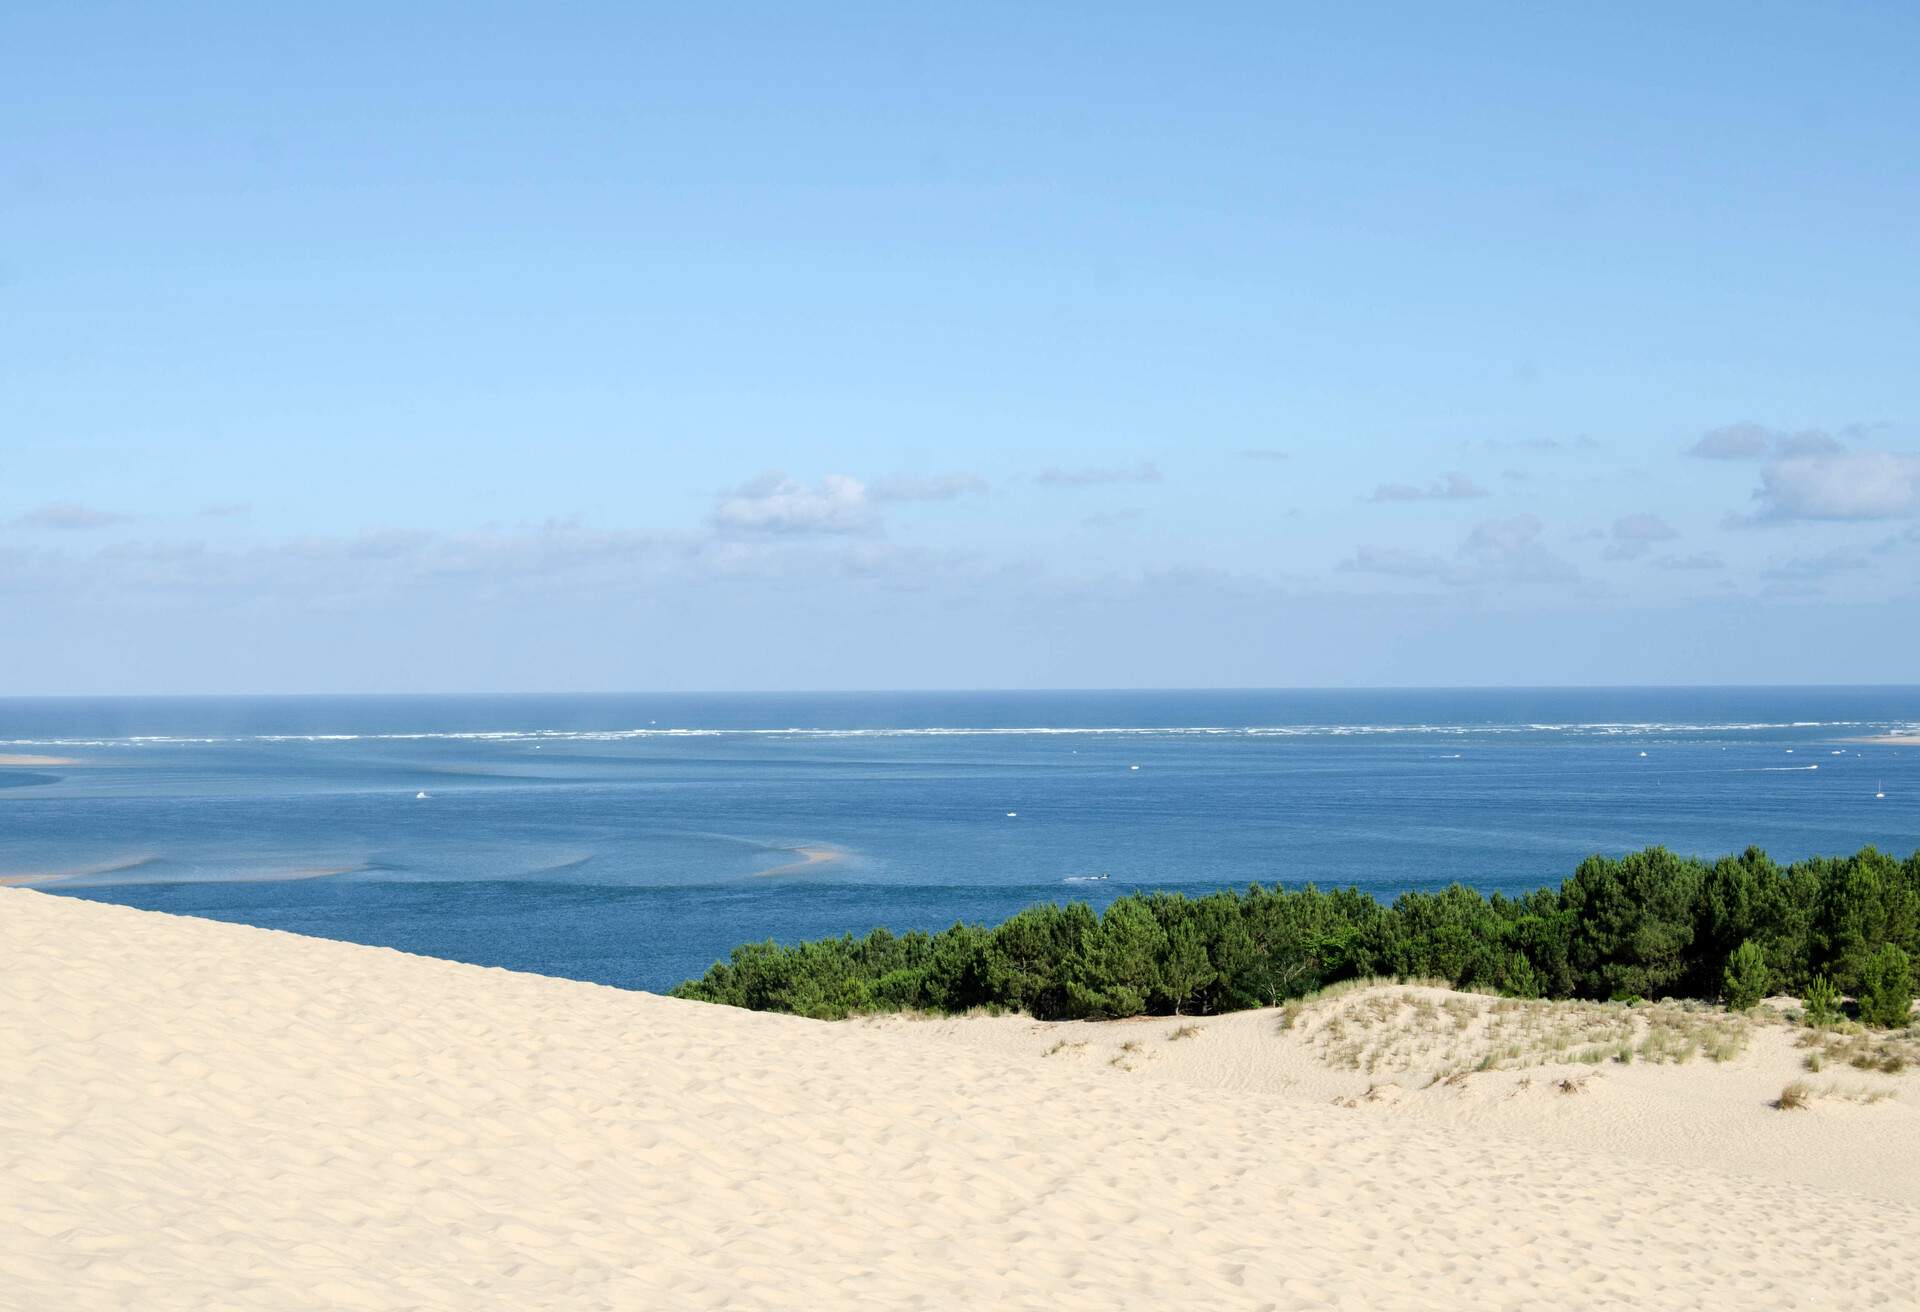 The Dune of Pilat (French: Dune du Pilat, official name), also called Grande Dune du Pilat) is the tallest sand dune in Europe. It is located in La Teste-de-Buch in the Arcachon Bay area, France, 60 km from Bordeaux...The dune has a volume of about 60,000,000 m³, measuring around 500 m wide from east to west and 2.7 km in length from north to south. Its height is currently 110 meters above sea level. The dune is a famous tourist destination with more than one million visitors per year.